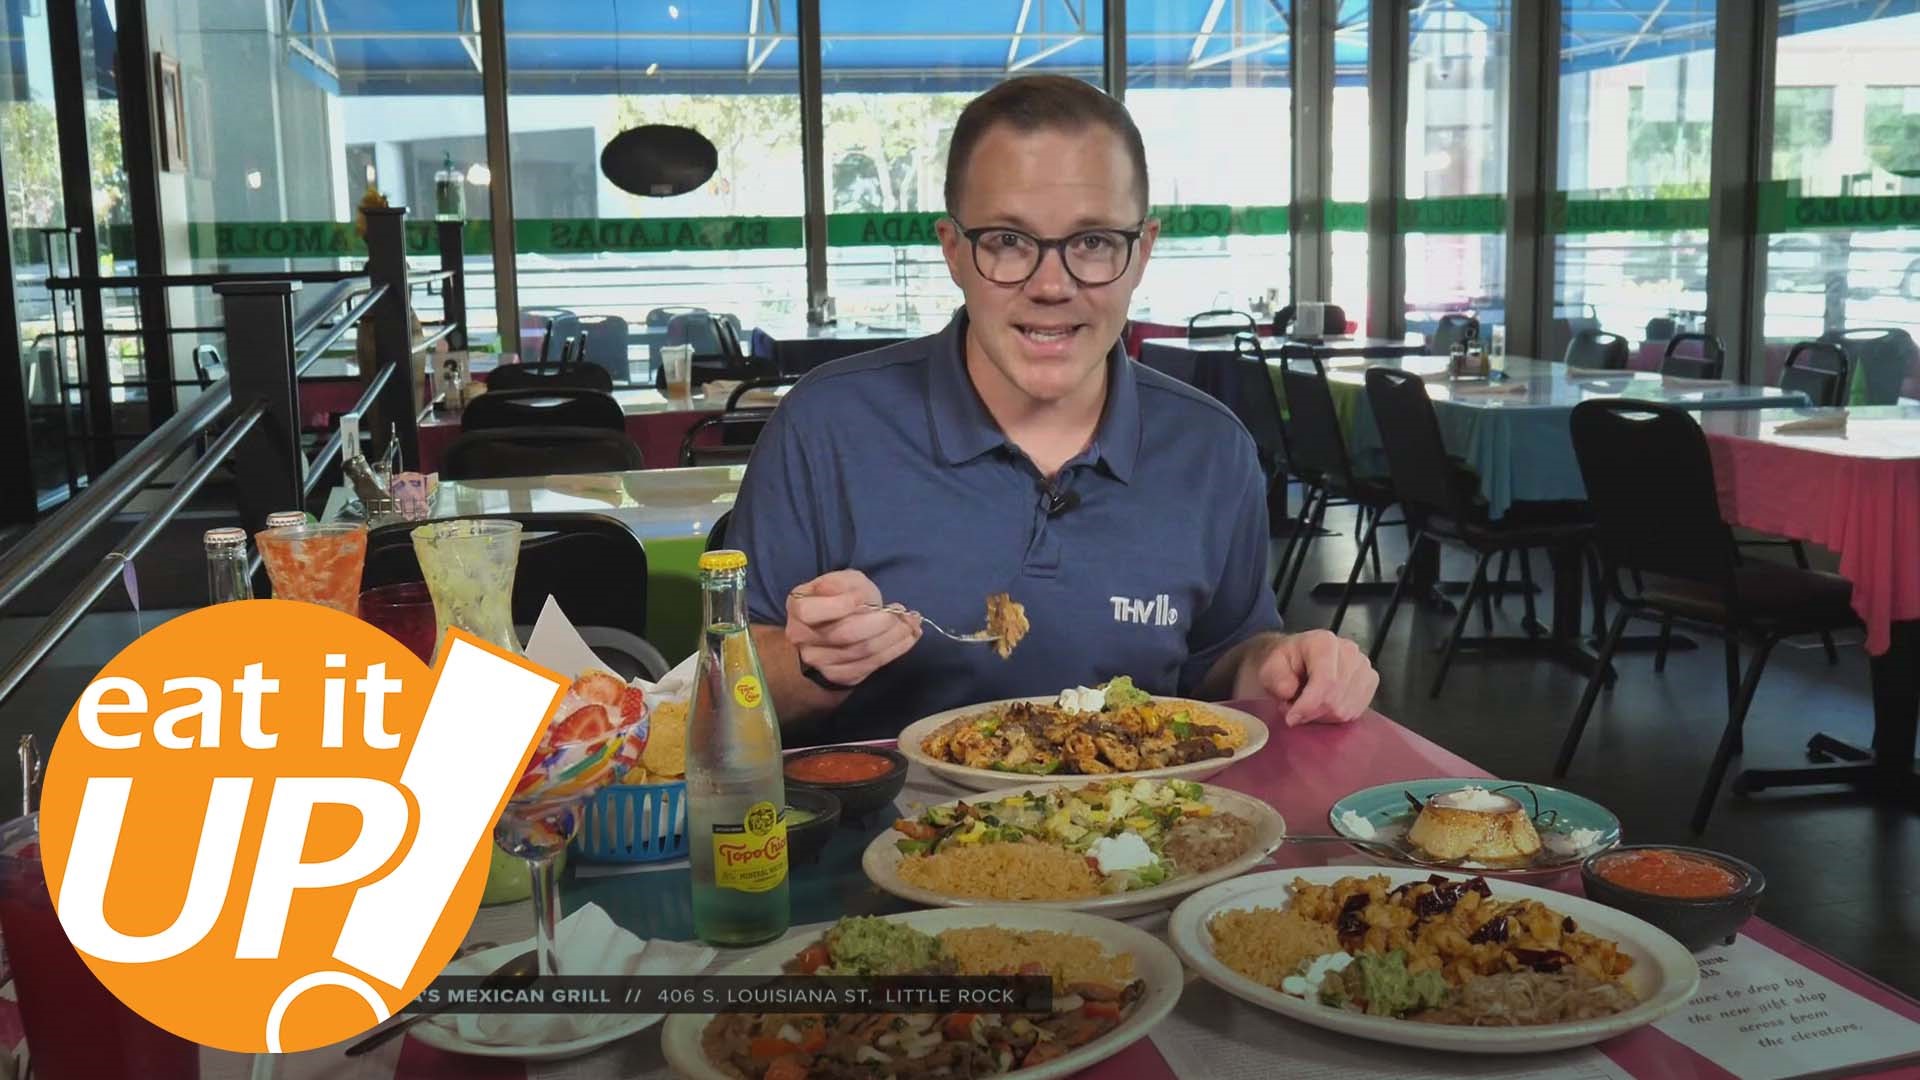 On this week's Eat It Up, Skot Covert visits Cotija's Mexican Grill in Little Rock, a family-owned lunch spot serving up authentic Mexican cuisine made with love.